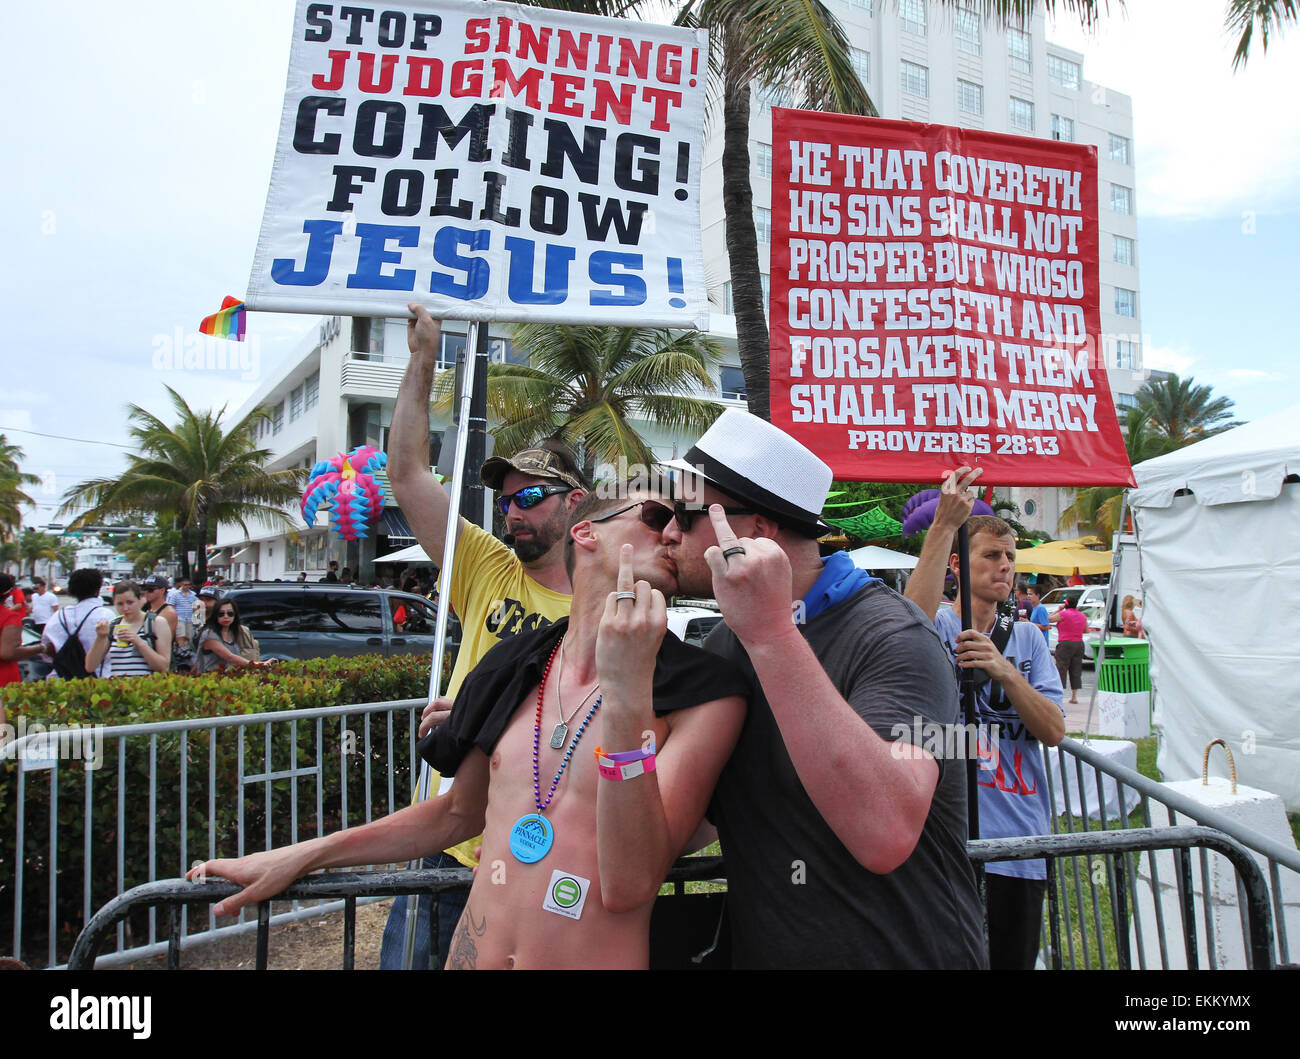 Miami Beach, Florida, USA. 11th April, 2015. Christopher Schultz (L) and Maxwell Finley of Westchester, New York, kiss in front of members of Team Jesus Preachers who assembled near 12th Street on Ocean Drive with banners to preach the teachings of the Bible and admonish the gay lifestyle during the Miami Beach Gay Pride festival in Miami Beach, Florida on 11 April, 2015.  Credit:  Sean Drakes/Alamy Live News Stock Photo